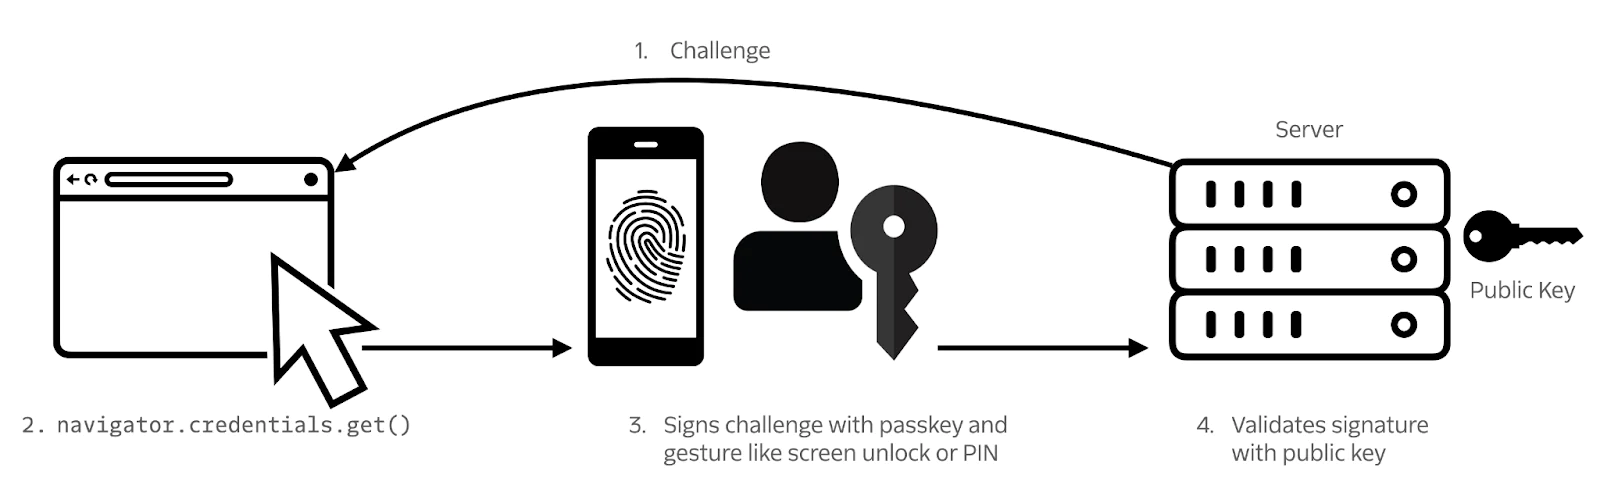 Simplified diagram of the passkey authentication/sign in process.